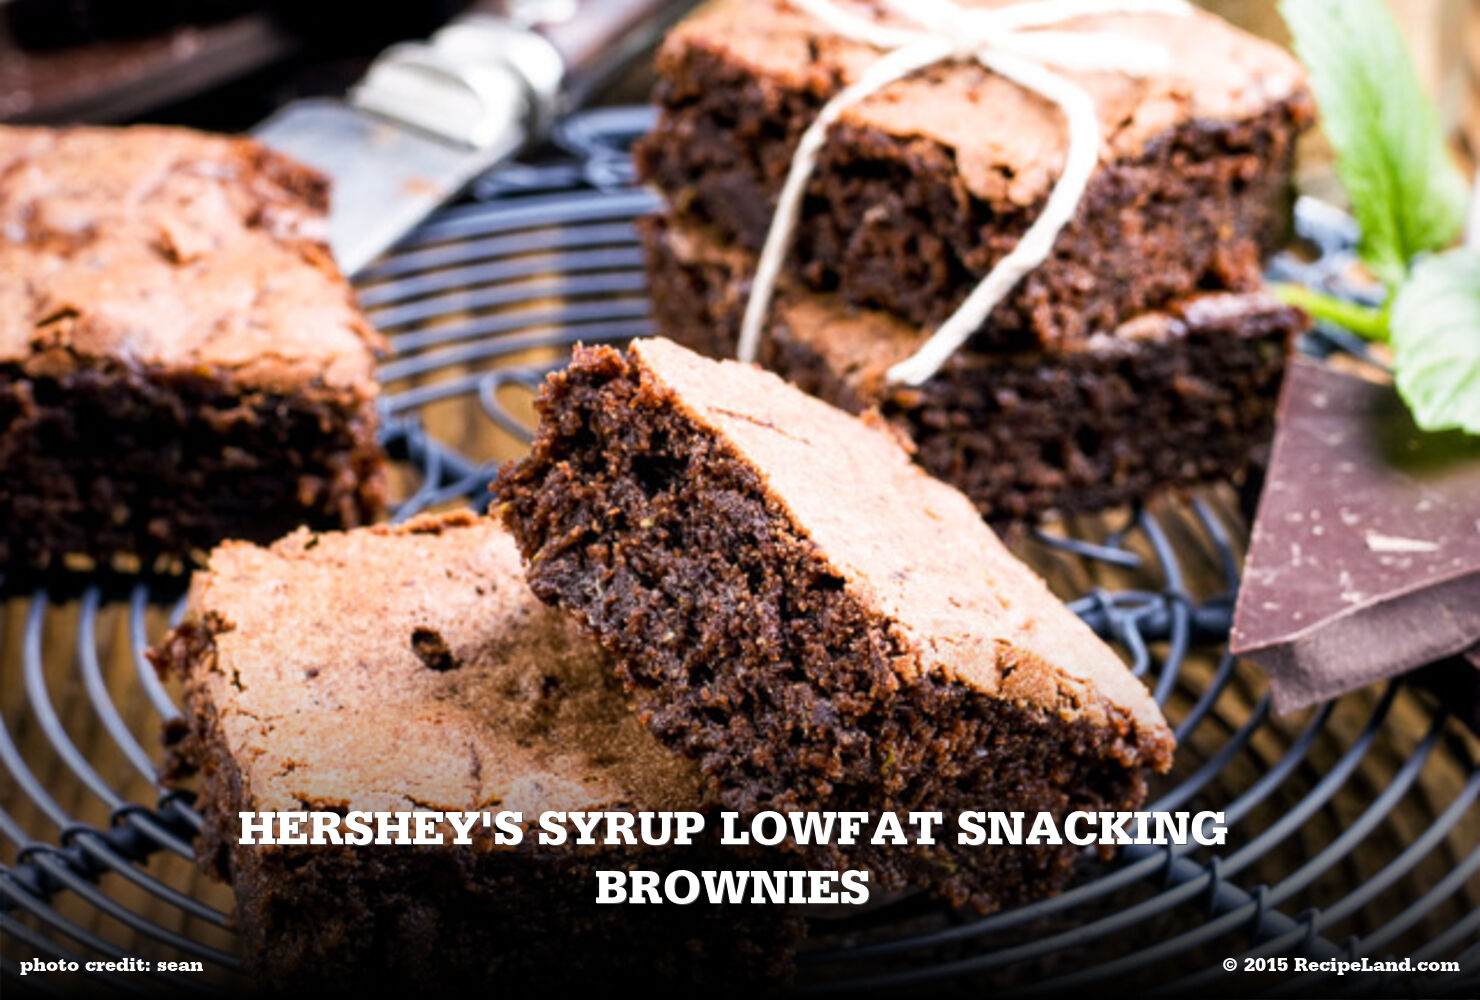 Hershey's Syrup Lowfat Snacking Brownies